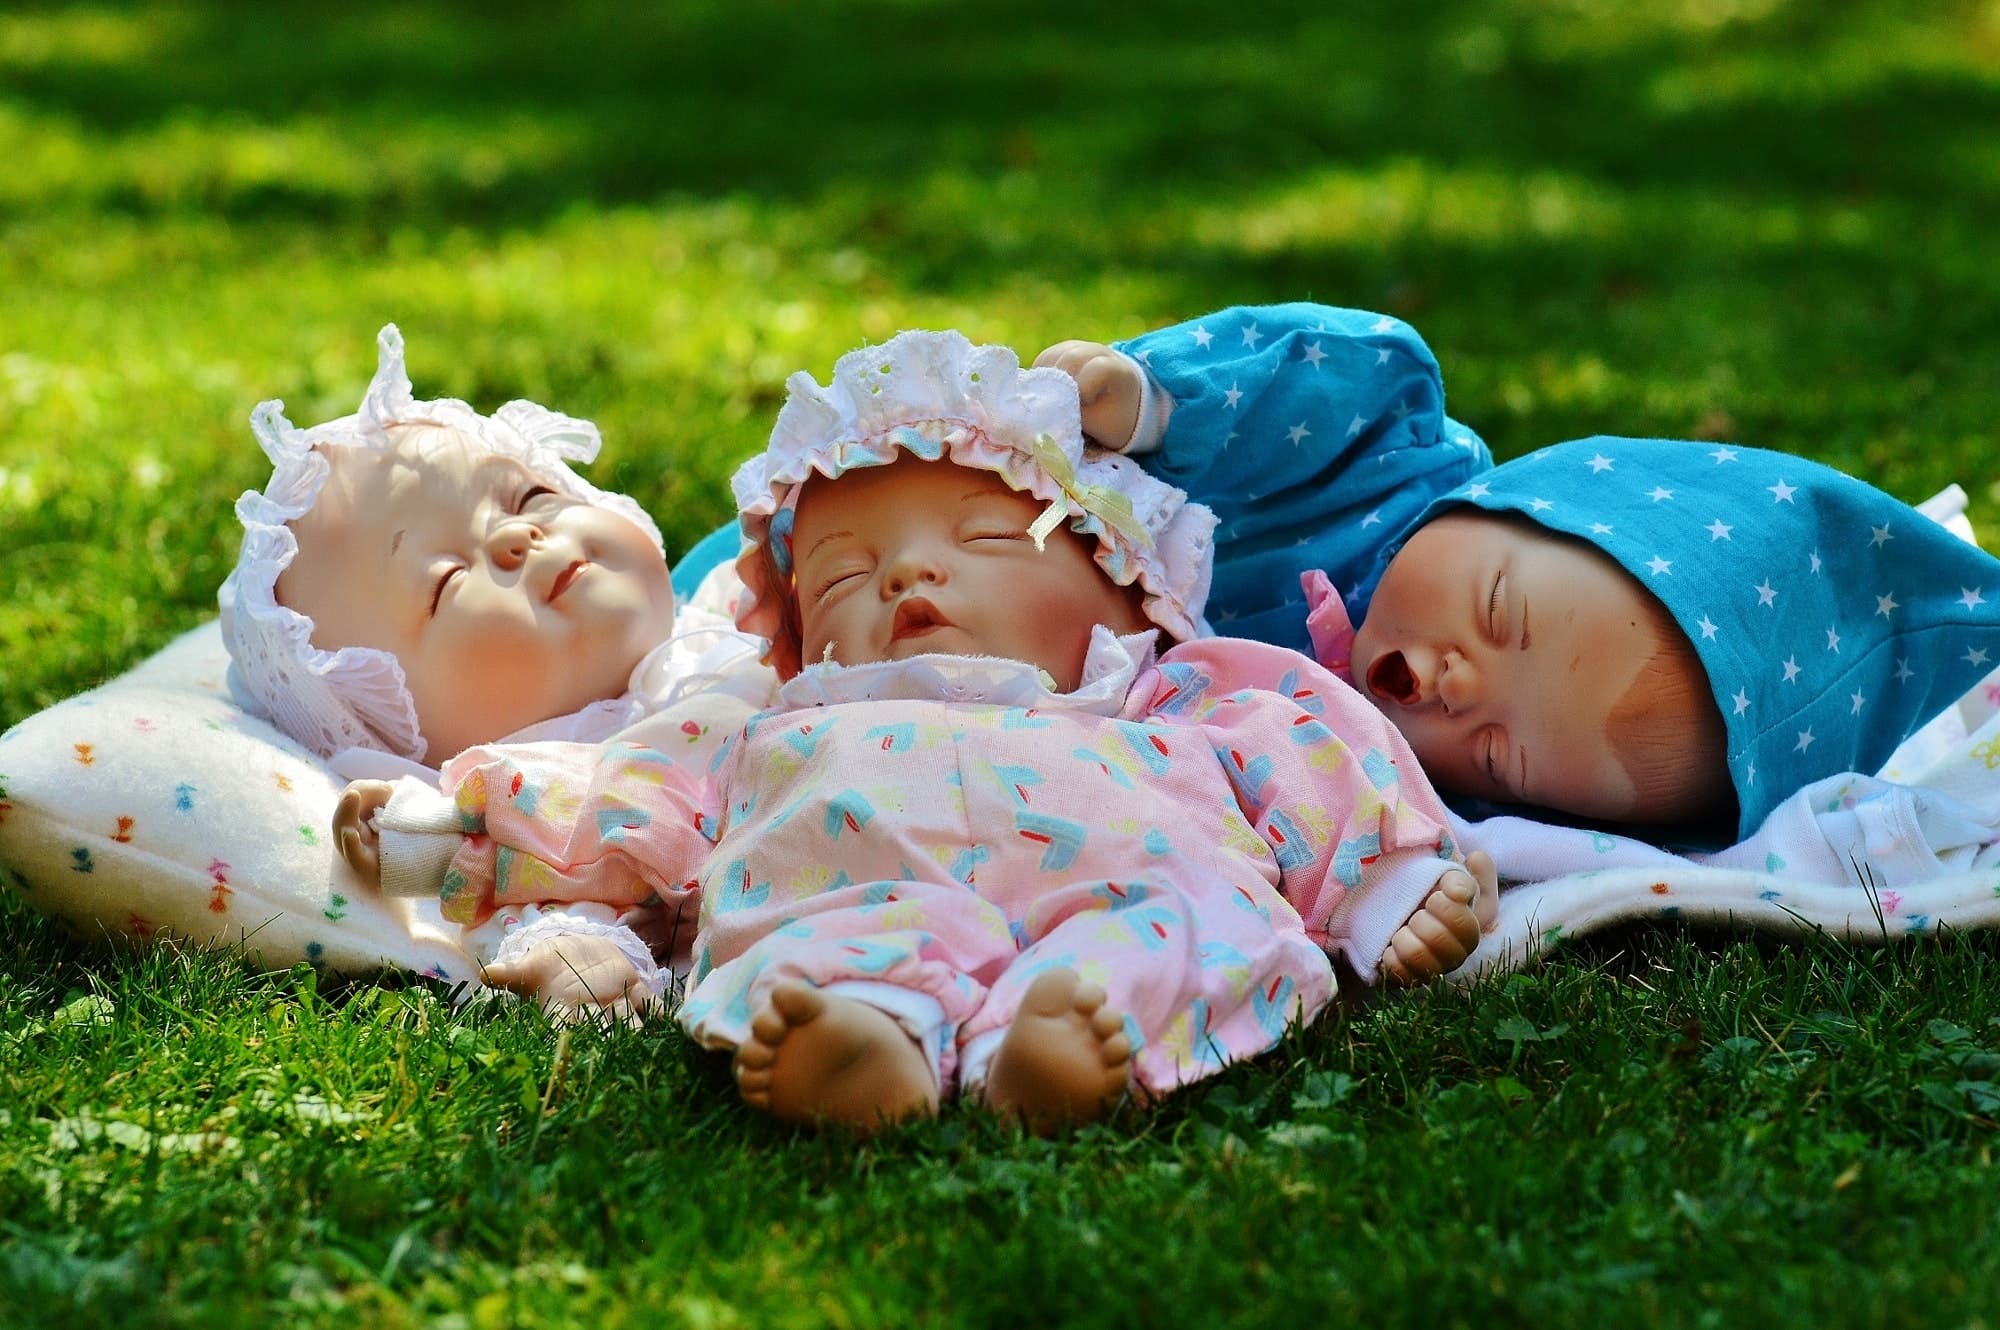 cute baby dolls laying on green grass lawn